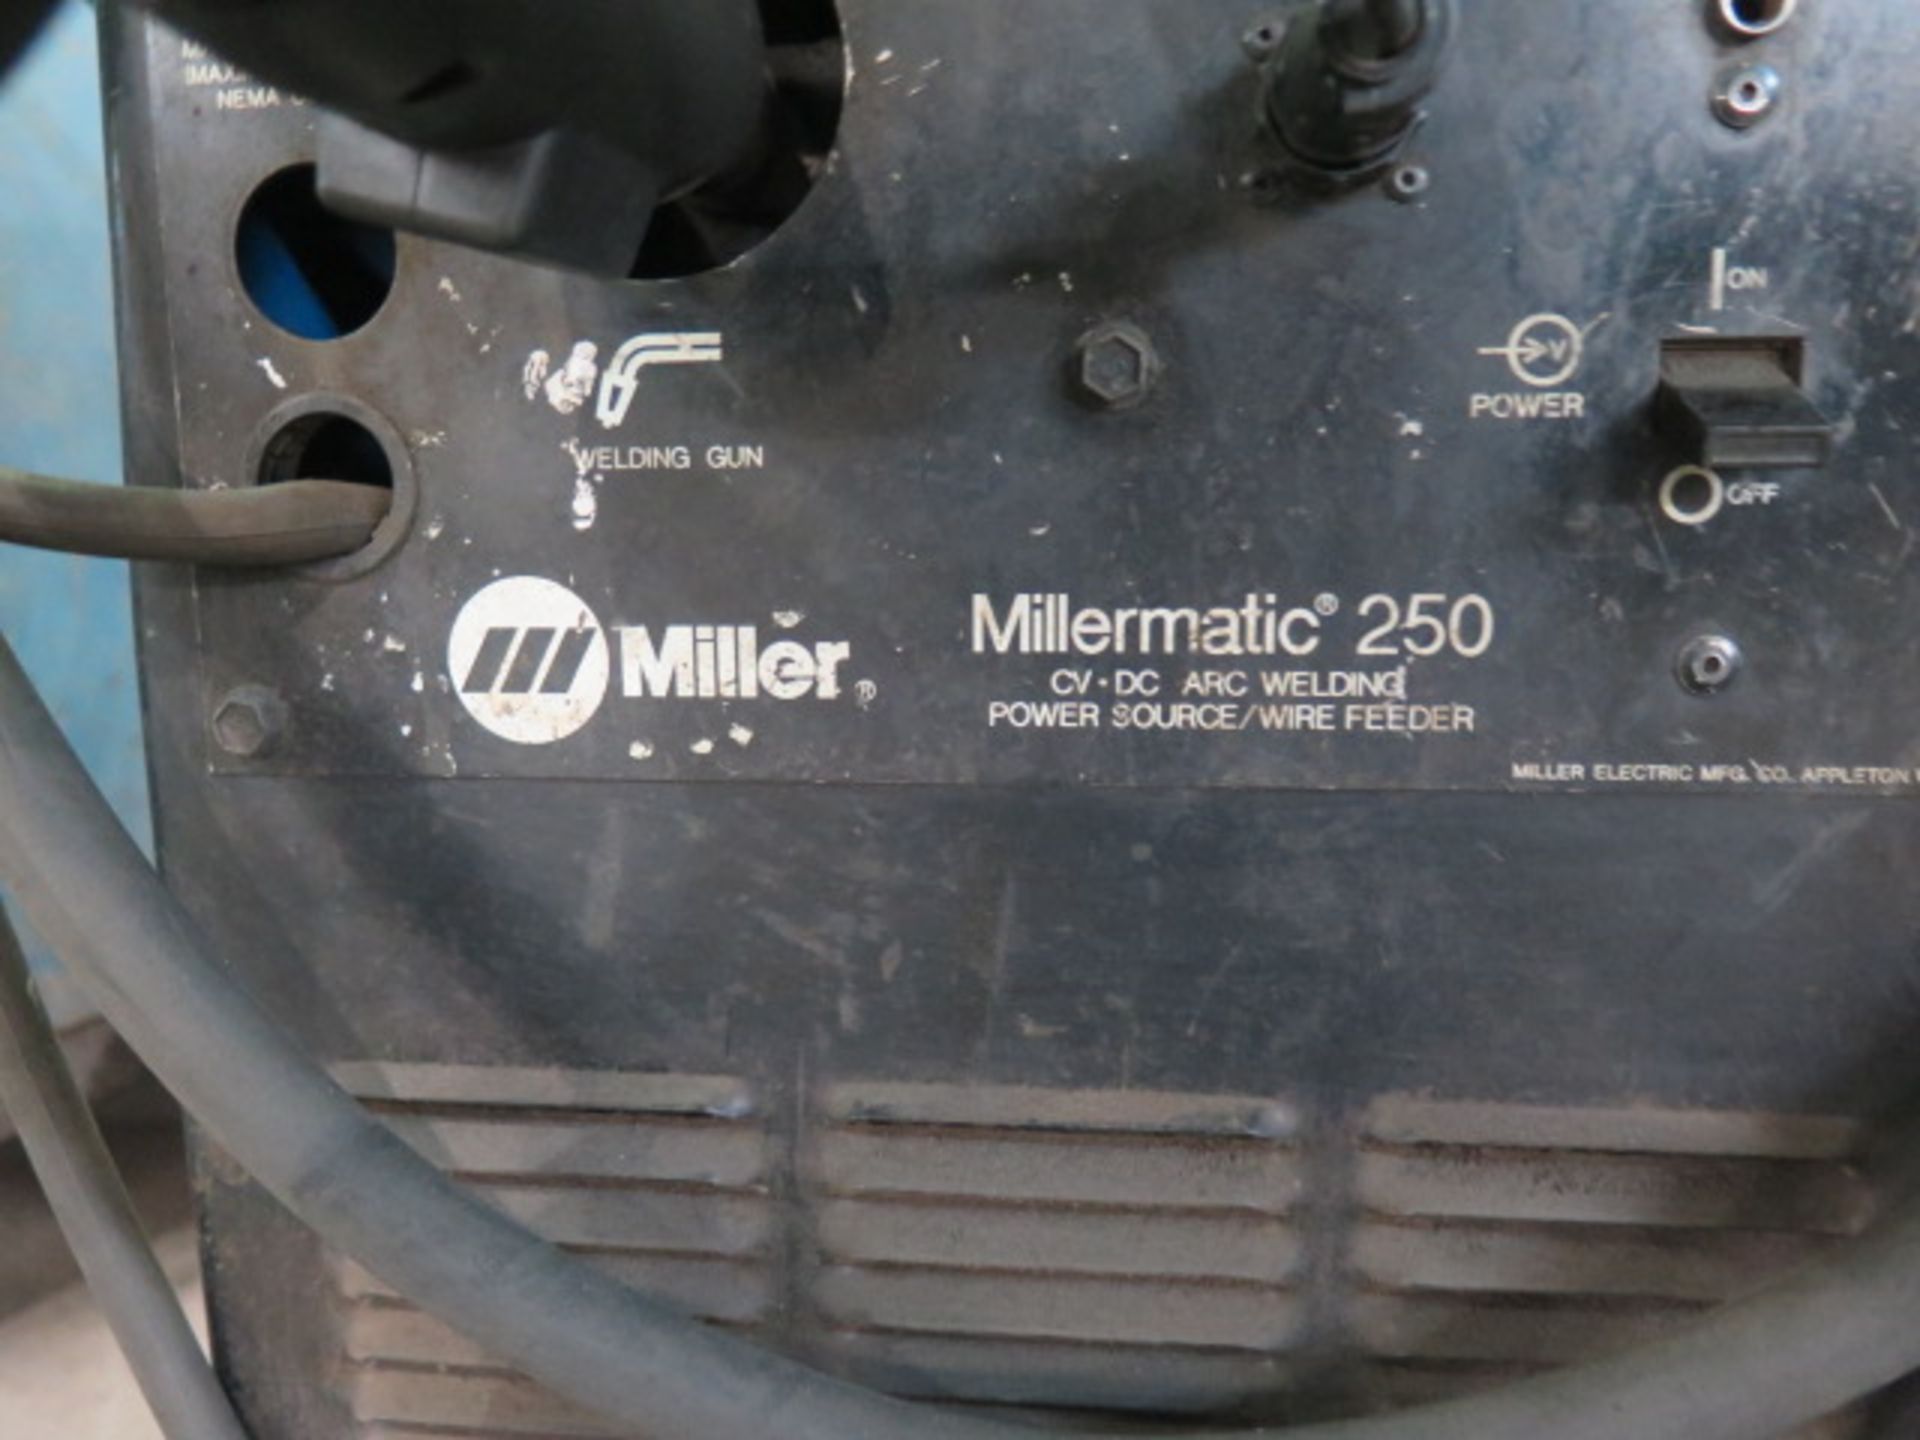 Miller Millermatic 250 CV-DC Arc welding Power Source and Wire Feeder (SOLD AS-IS - N0 WARRANTY) - Image 5 of 5